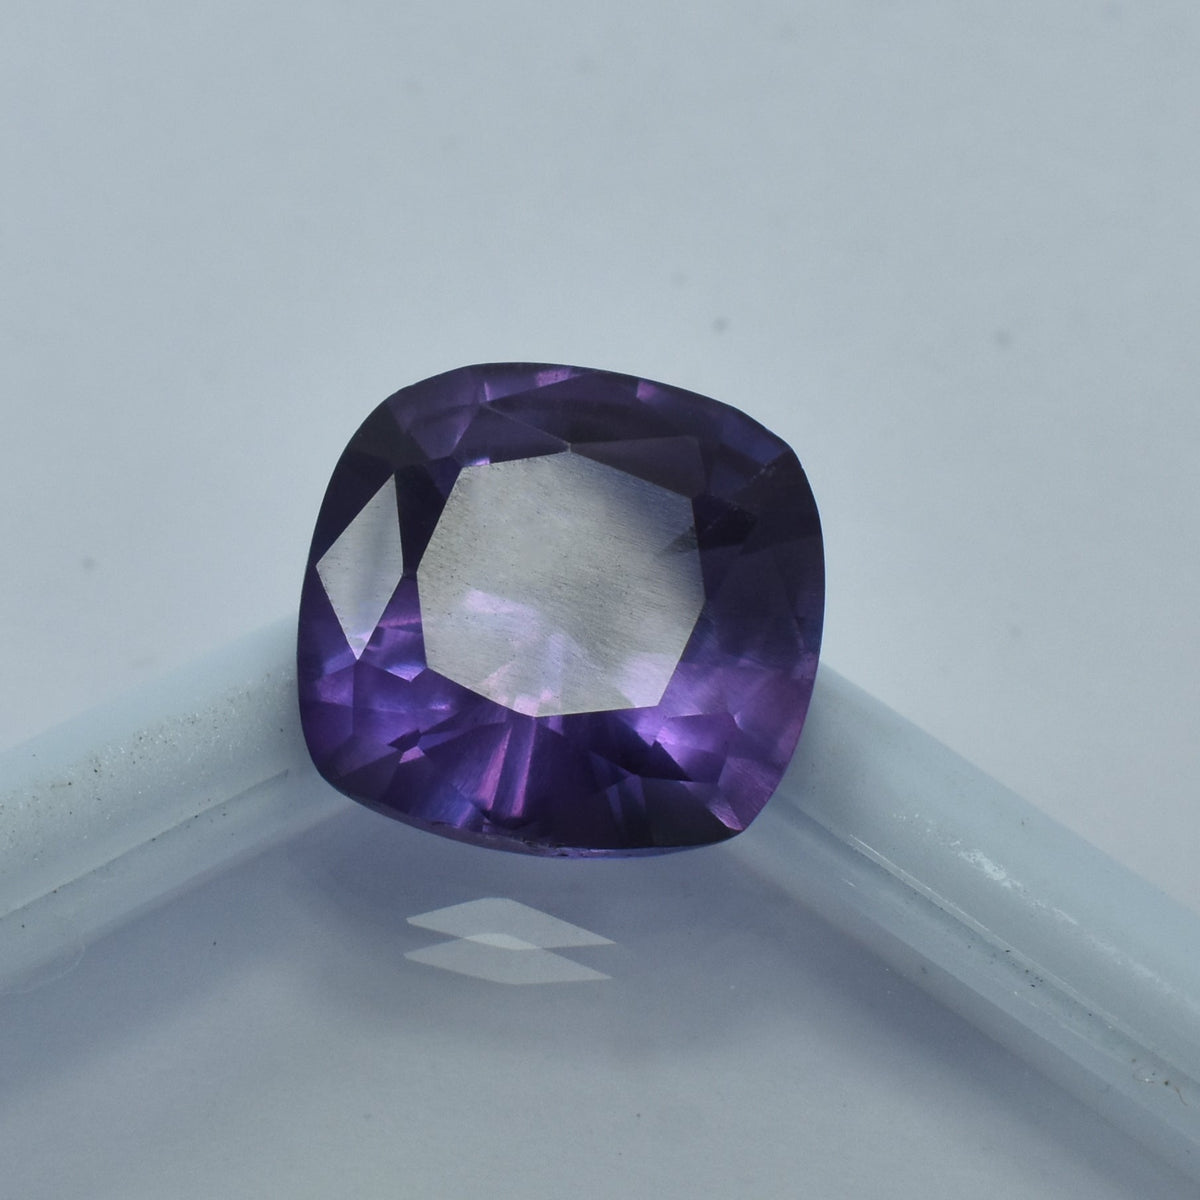 Natural Square Cushion Cut 12.65 Carat Certified Loose Gemstone Purple Color Change Sapphire | Jwelery Making Gem | Suitable Price